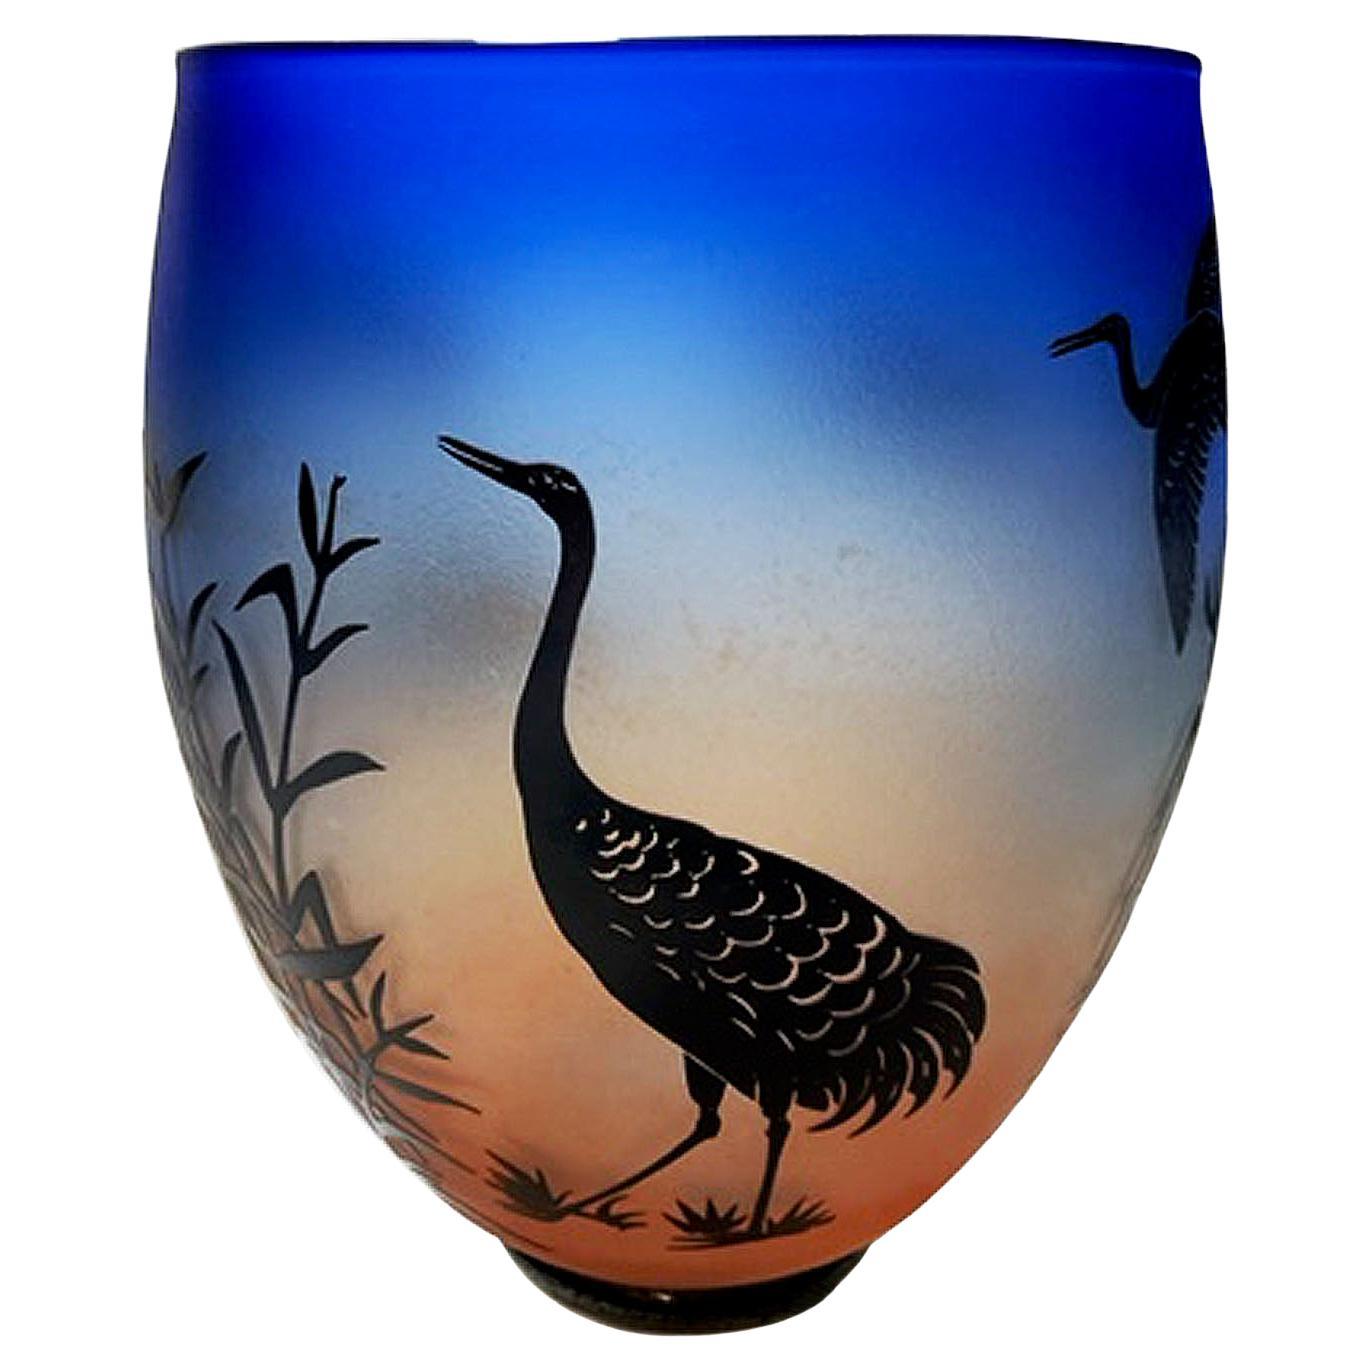 Overlay Cameo Etched Vessel with Cranes '8 of 50' For Sale